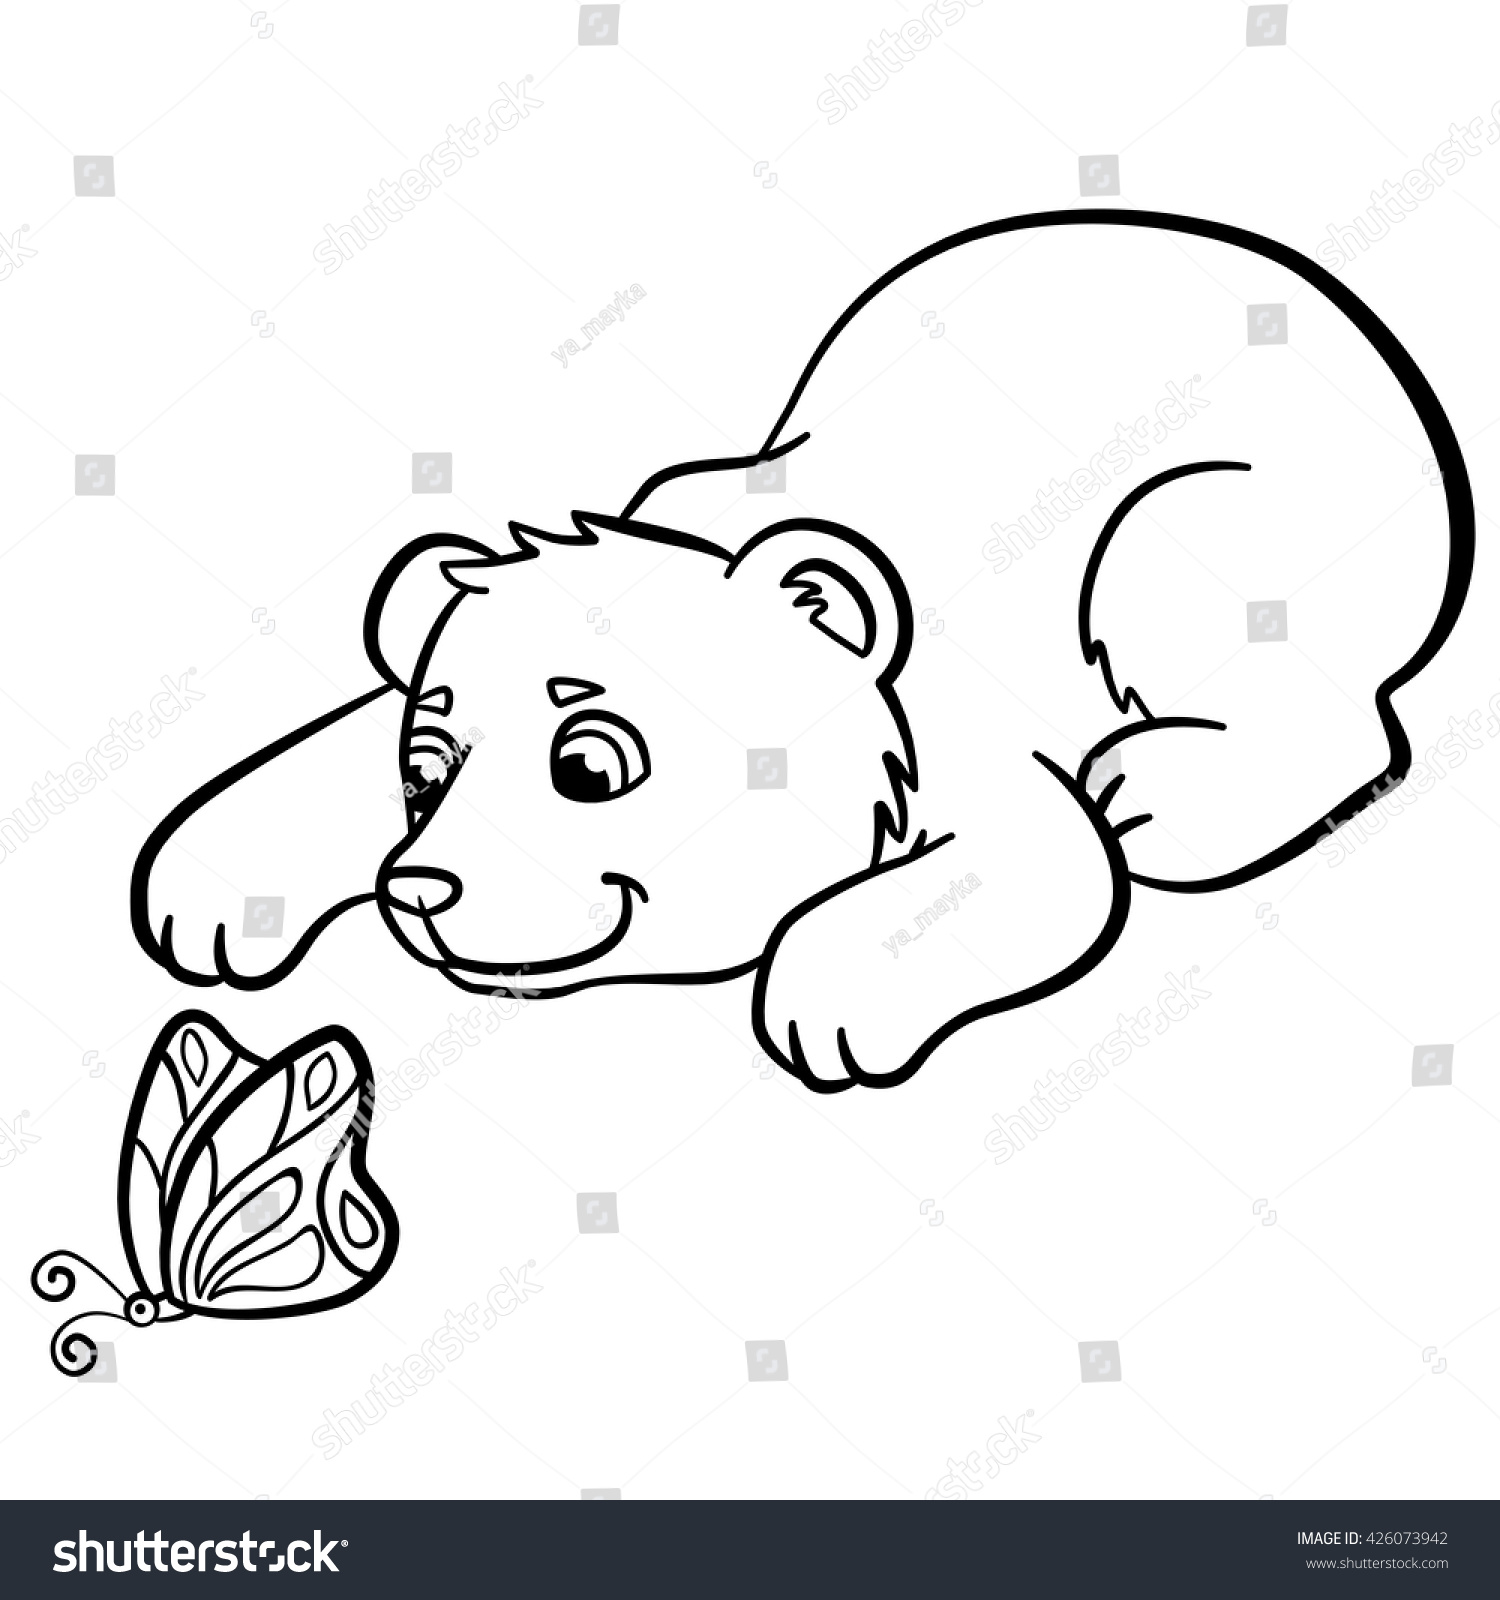 Coloring Pages Wild Animals Little Cute Stock Vector Royalty Free ...